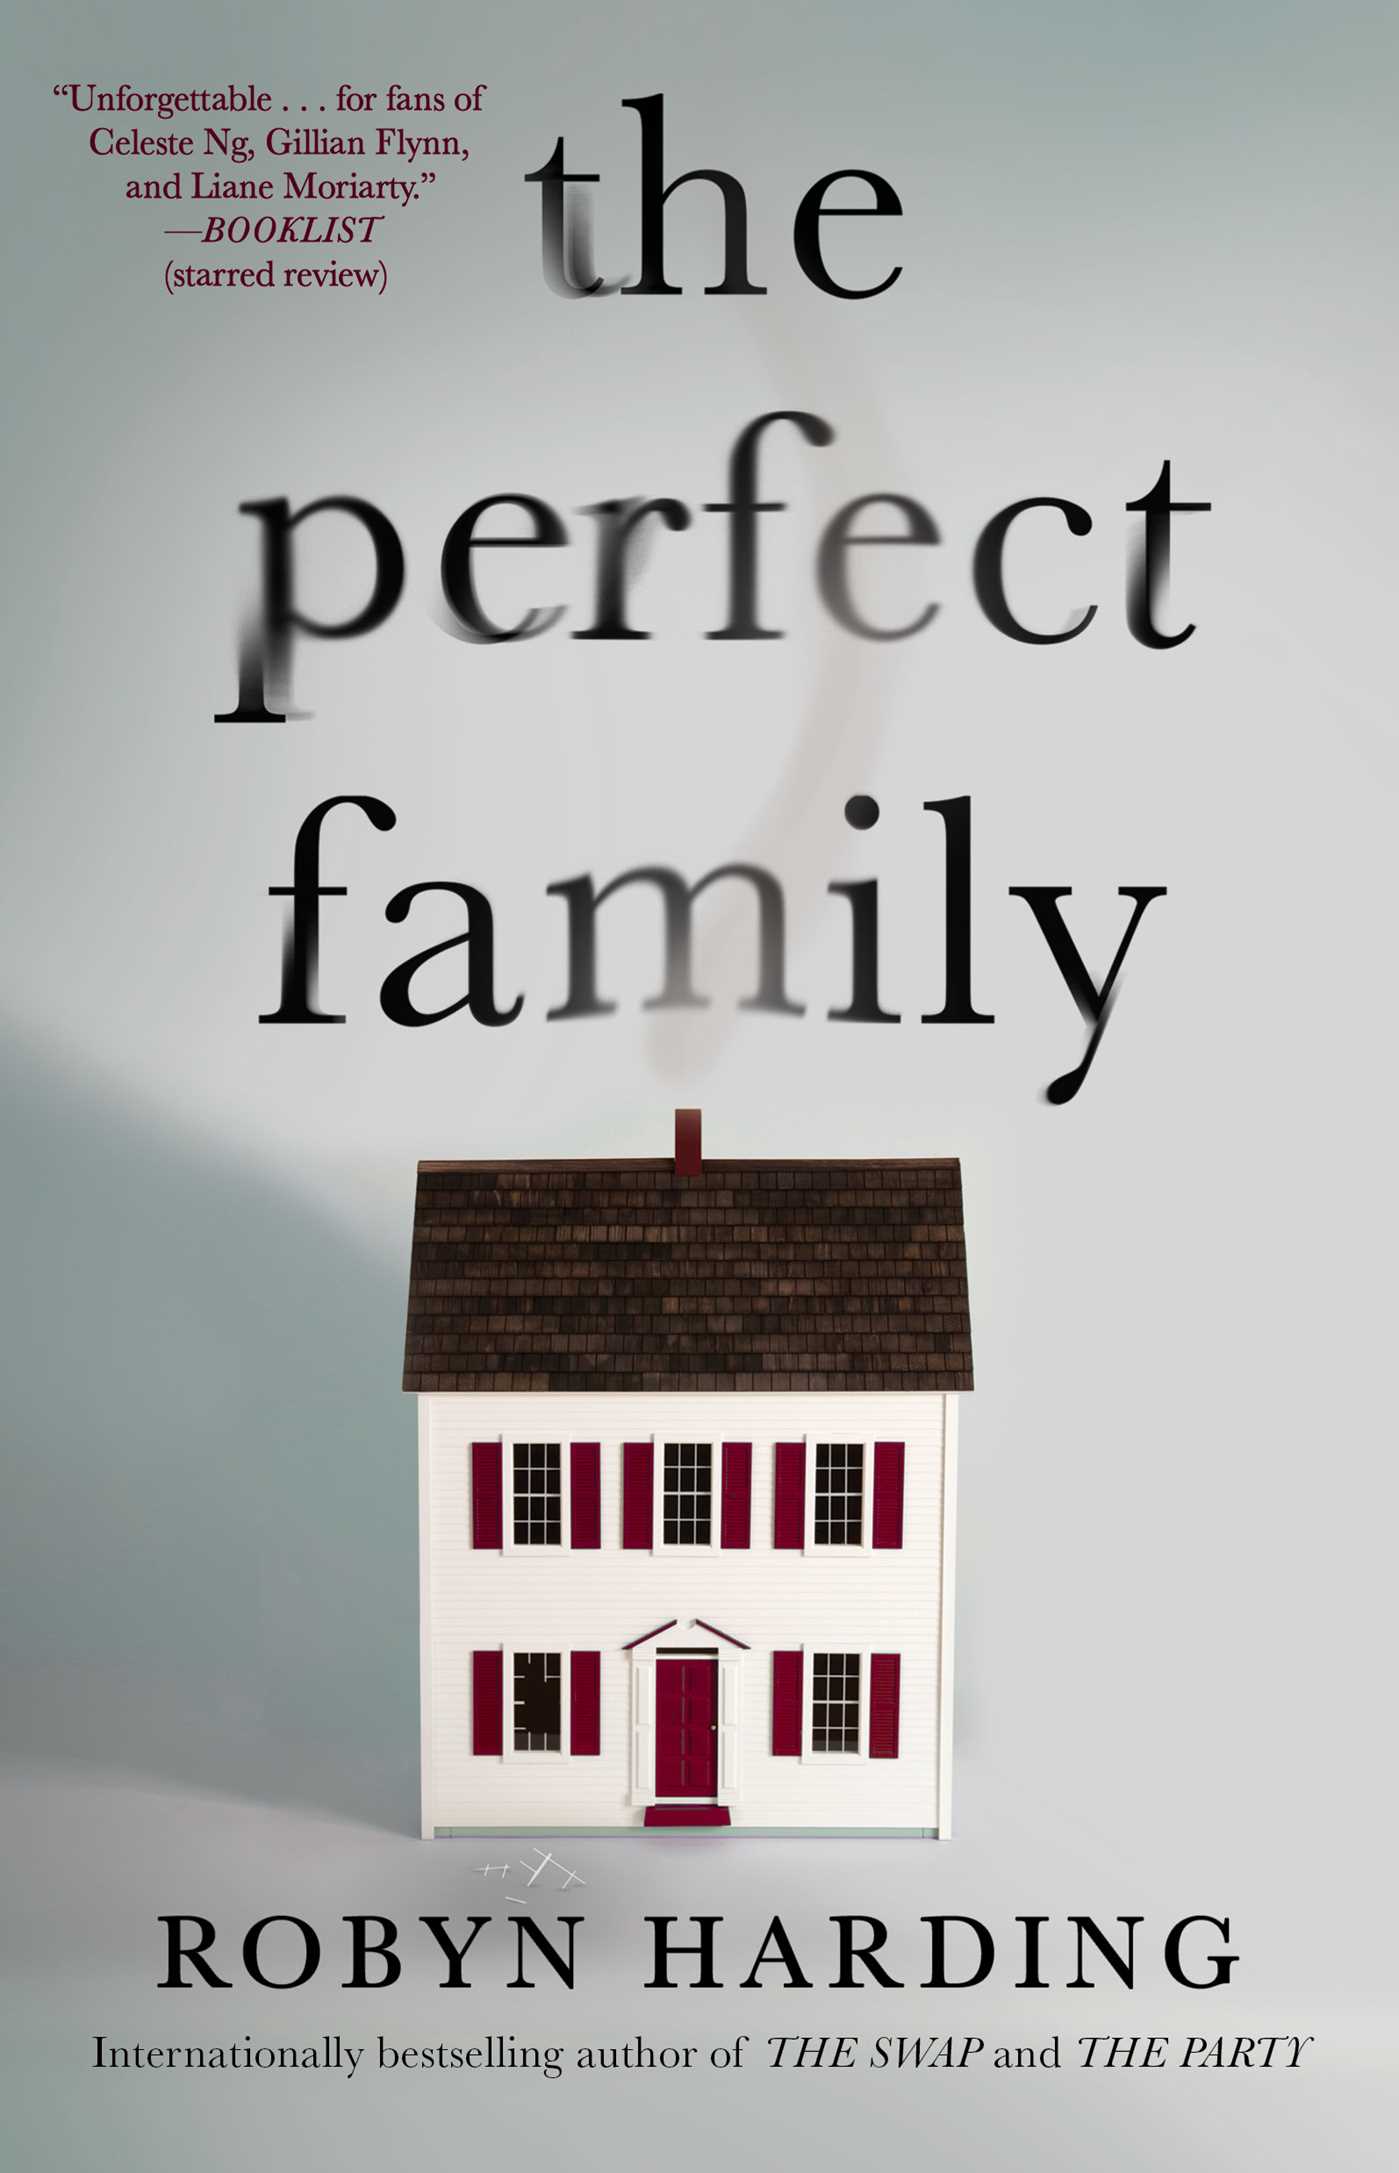 [EPUB] The Perfect Family by Robyn Harding